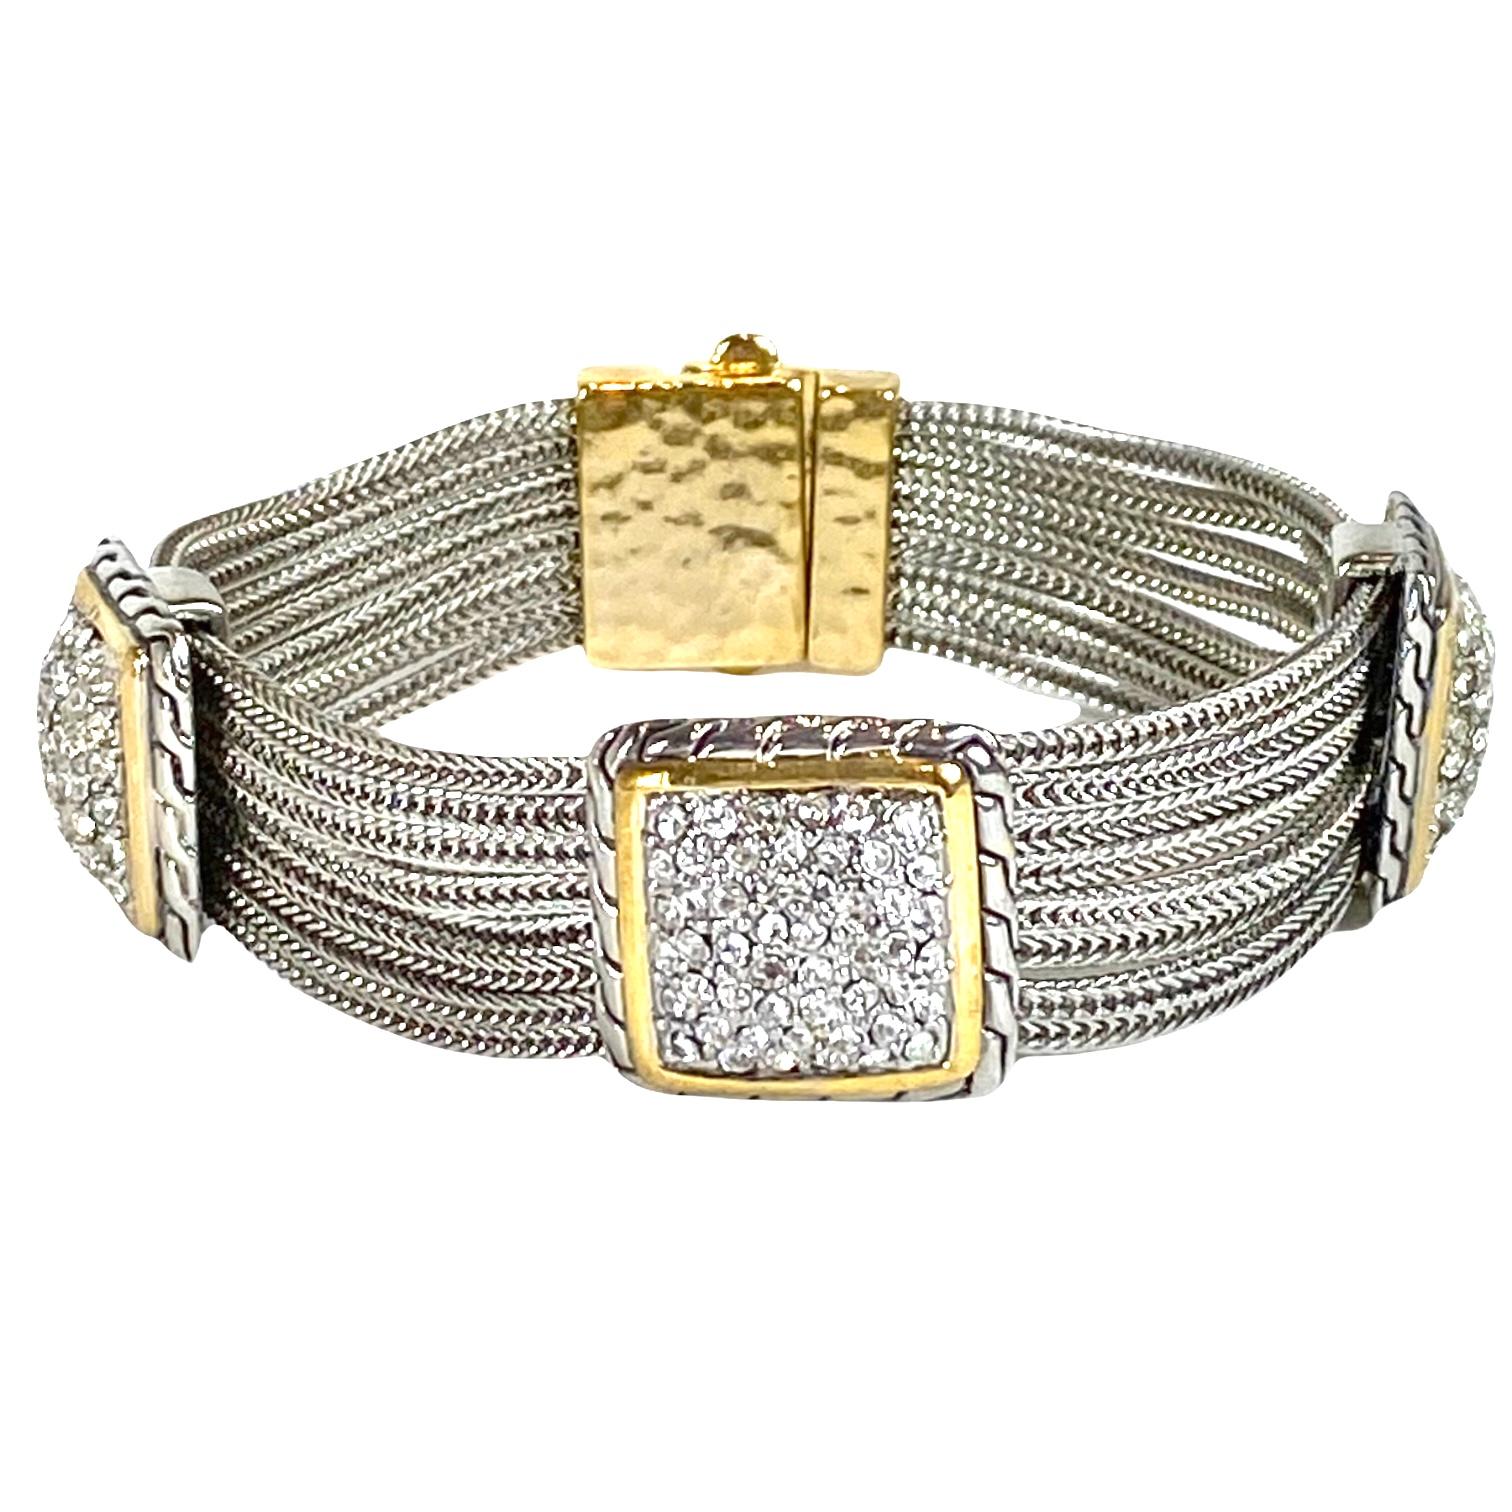 Silver and gold mesh bracelet w/ square rhinestone stations
7.5